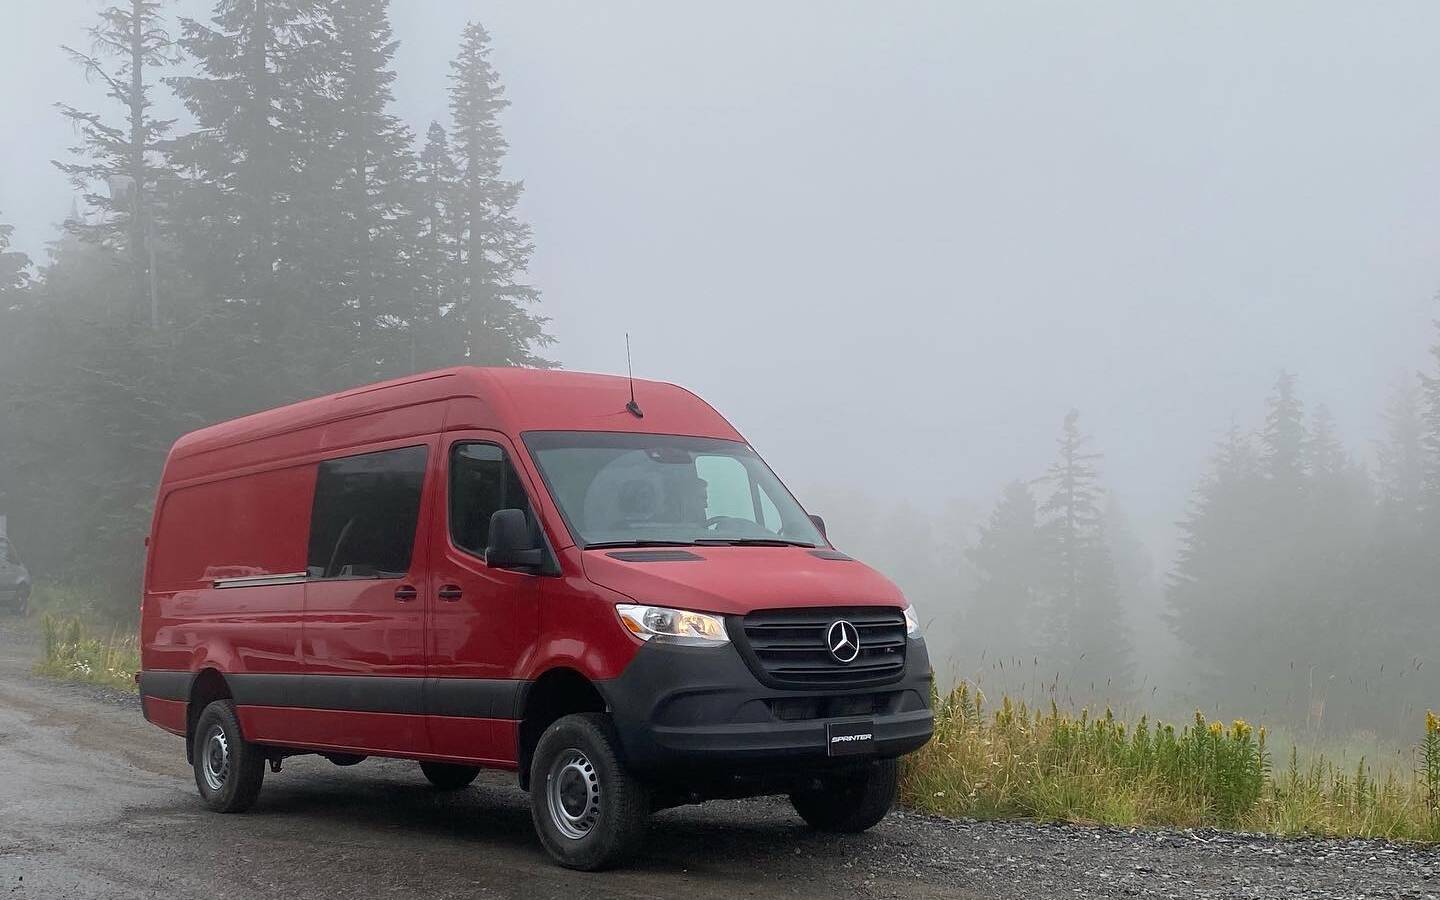 https://i.gaw.to/content/photos/54/60/546041-2023-mercedes-benz-sprinter-vanlife-elevated.jpeg